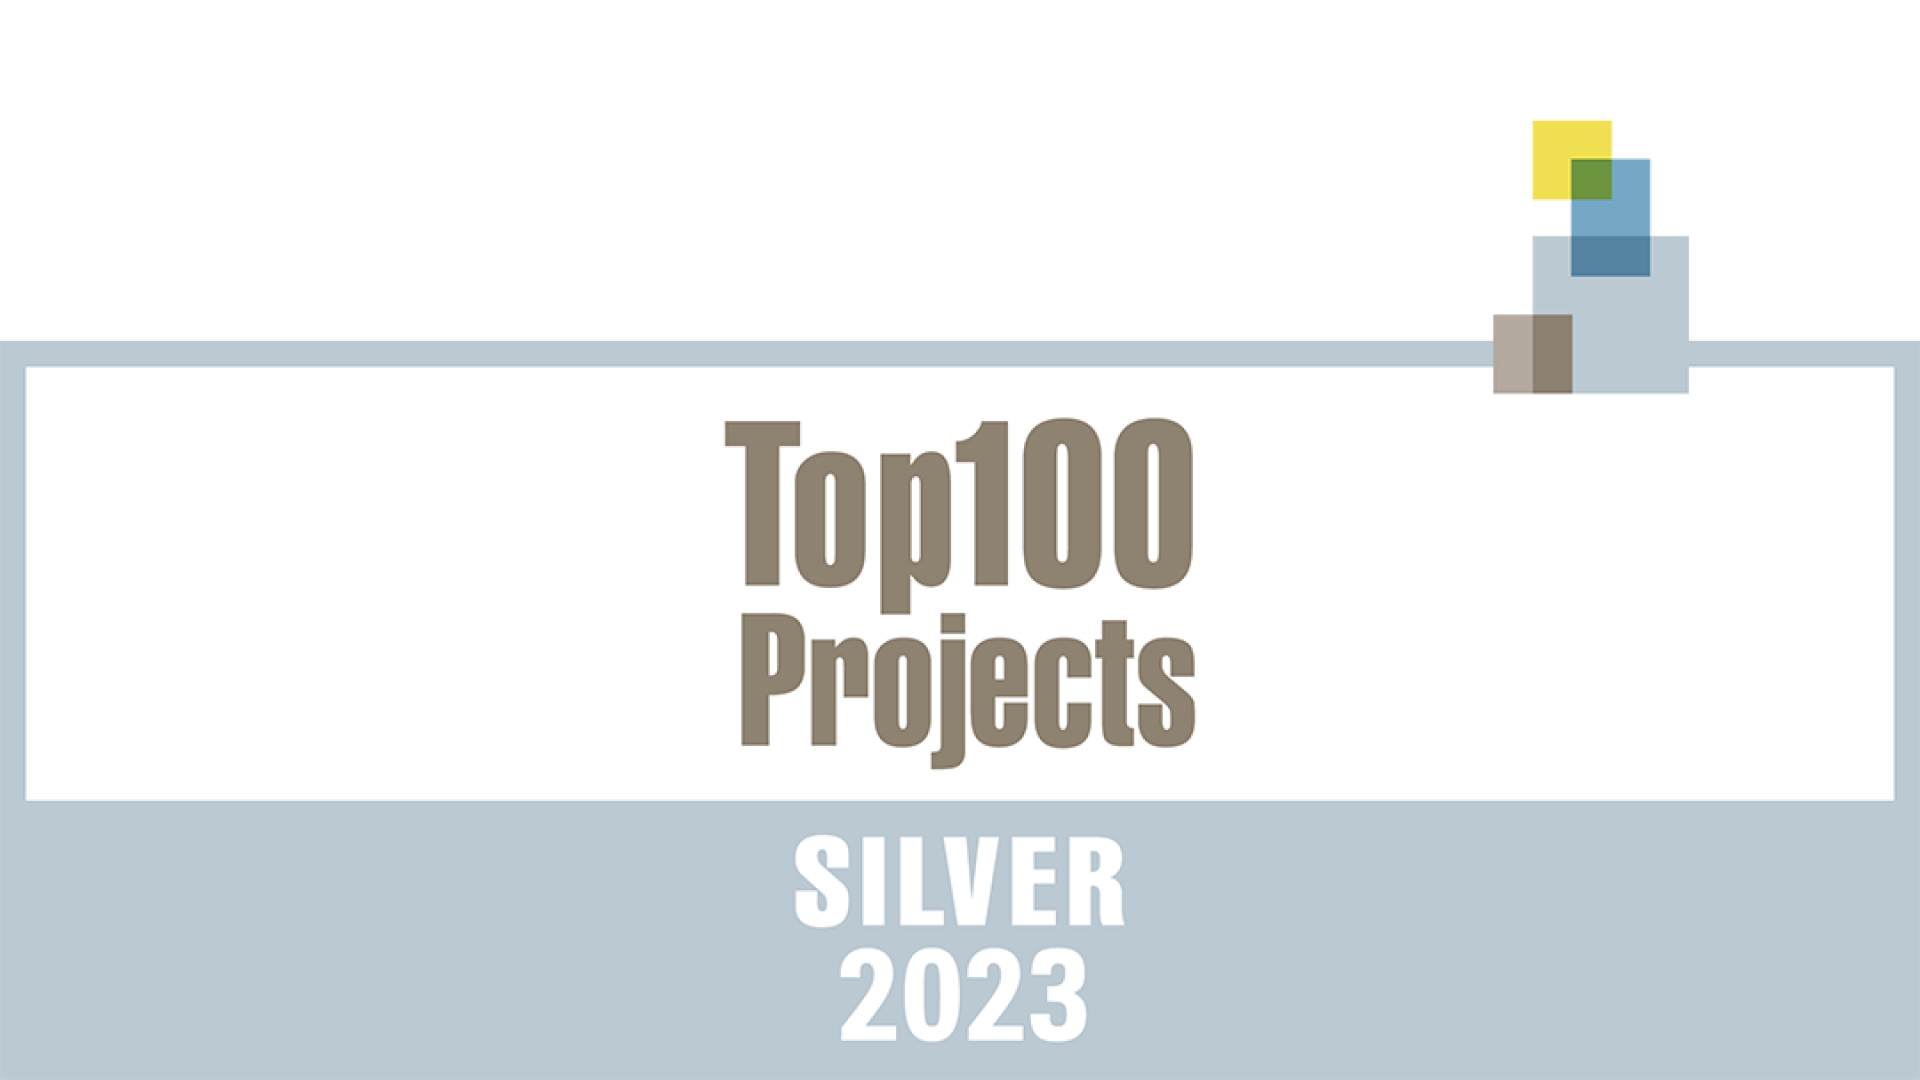 Canada’s Oldest Ballet Company - top_100_projects_2